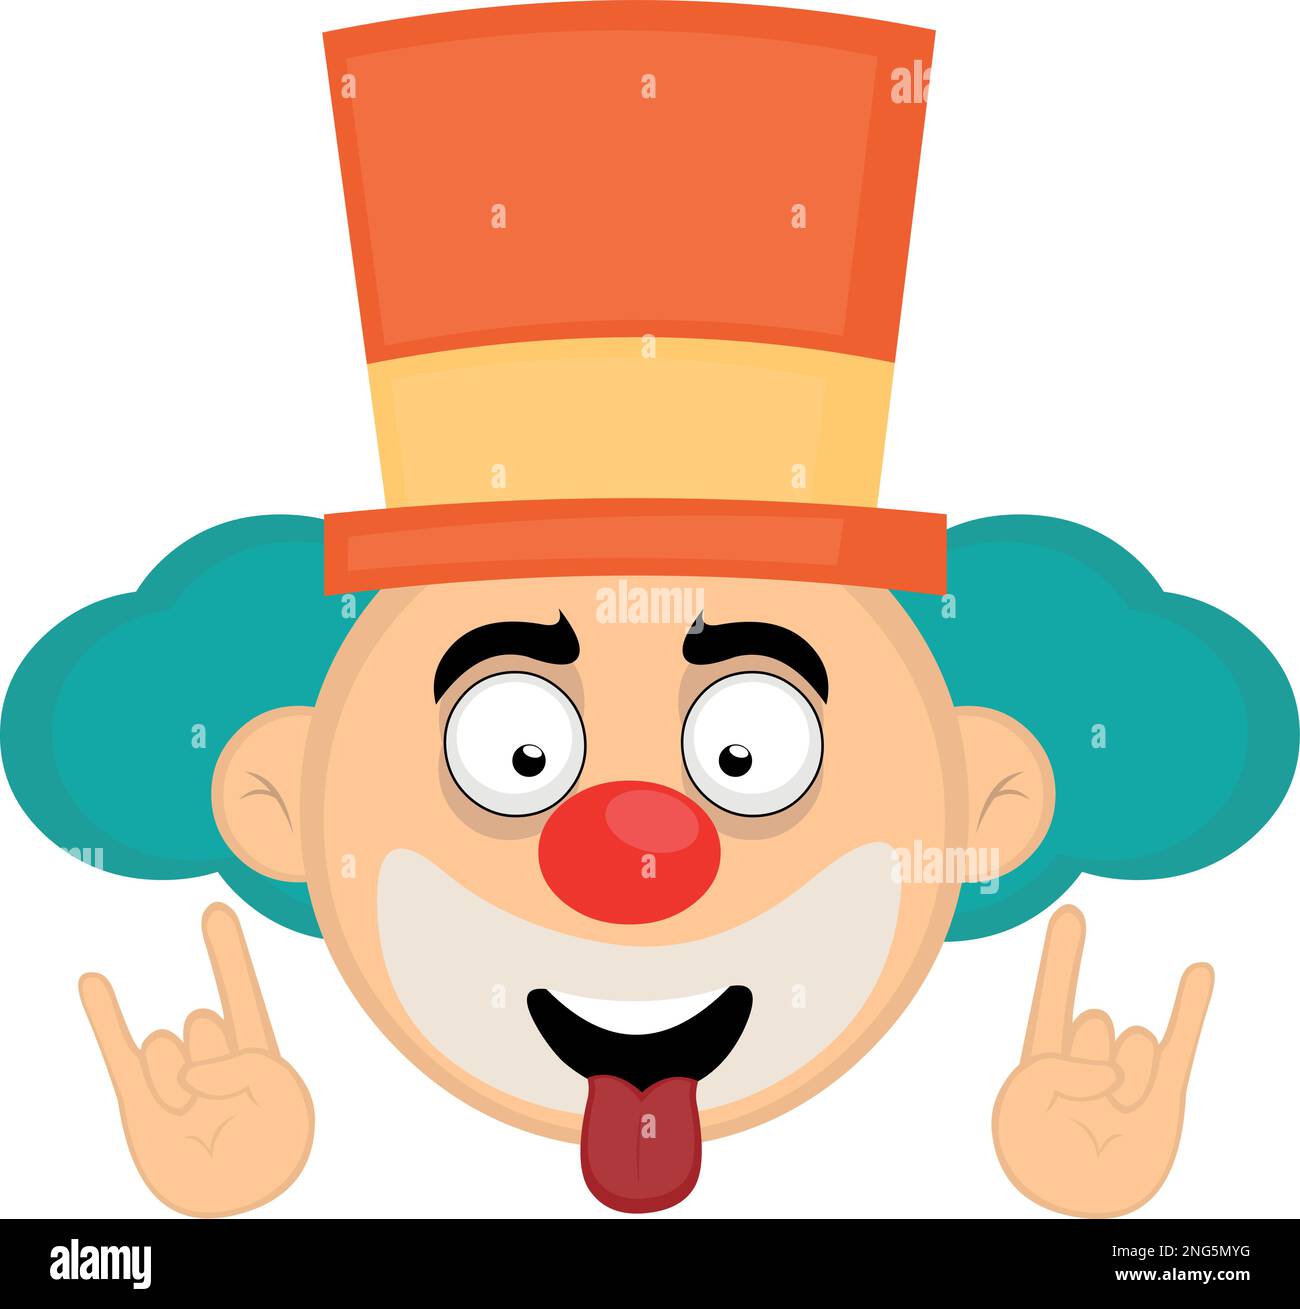 vector illustration face of a cartoon clown with his tongue out and his hands making the classic heavy metal gesture Stock Vector